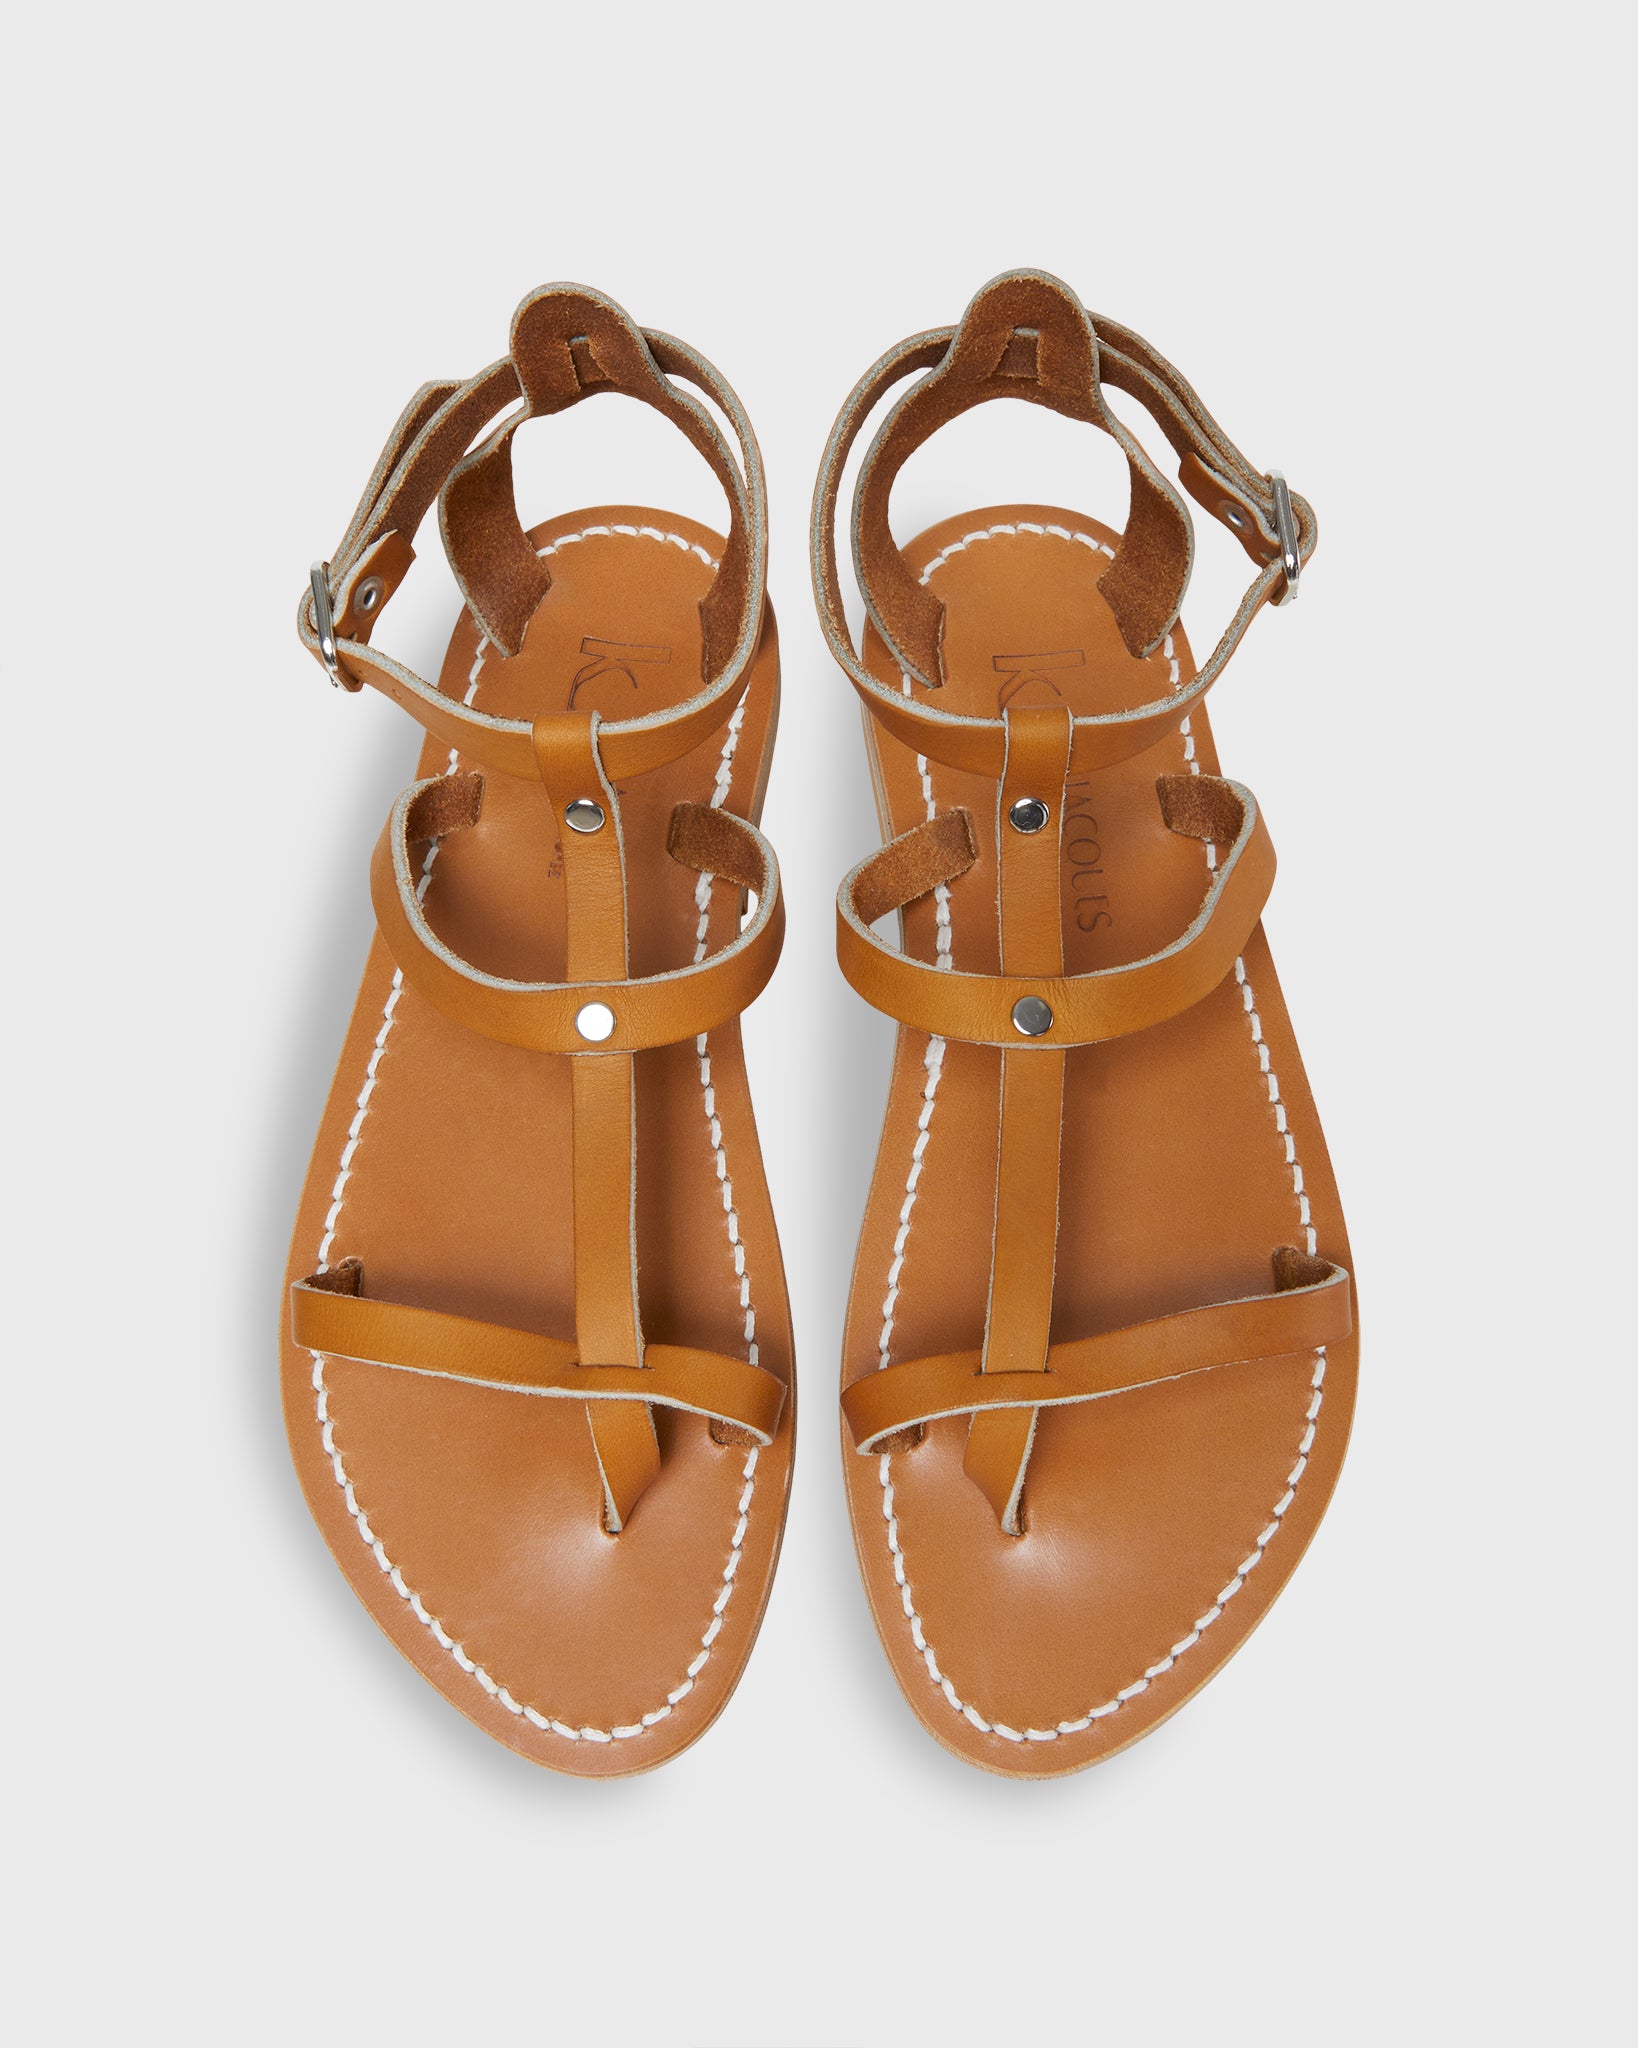 Antioche Sandal in Natural Leather